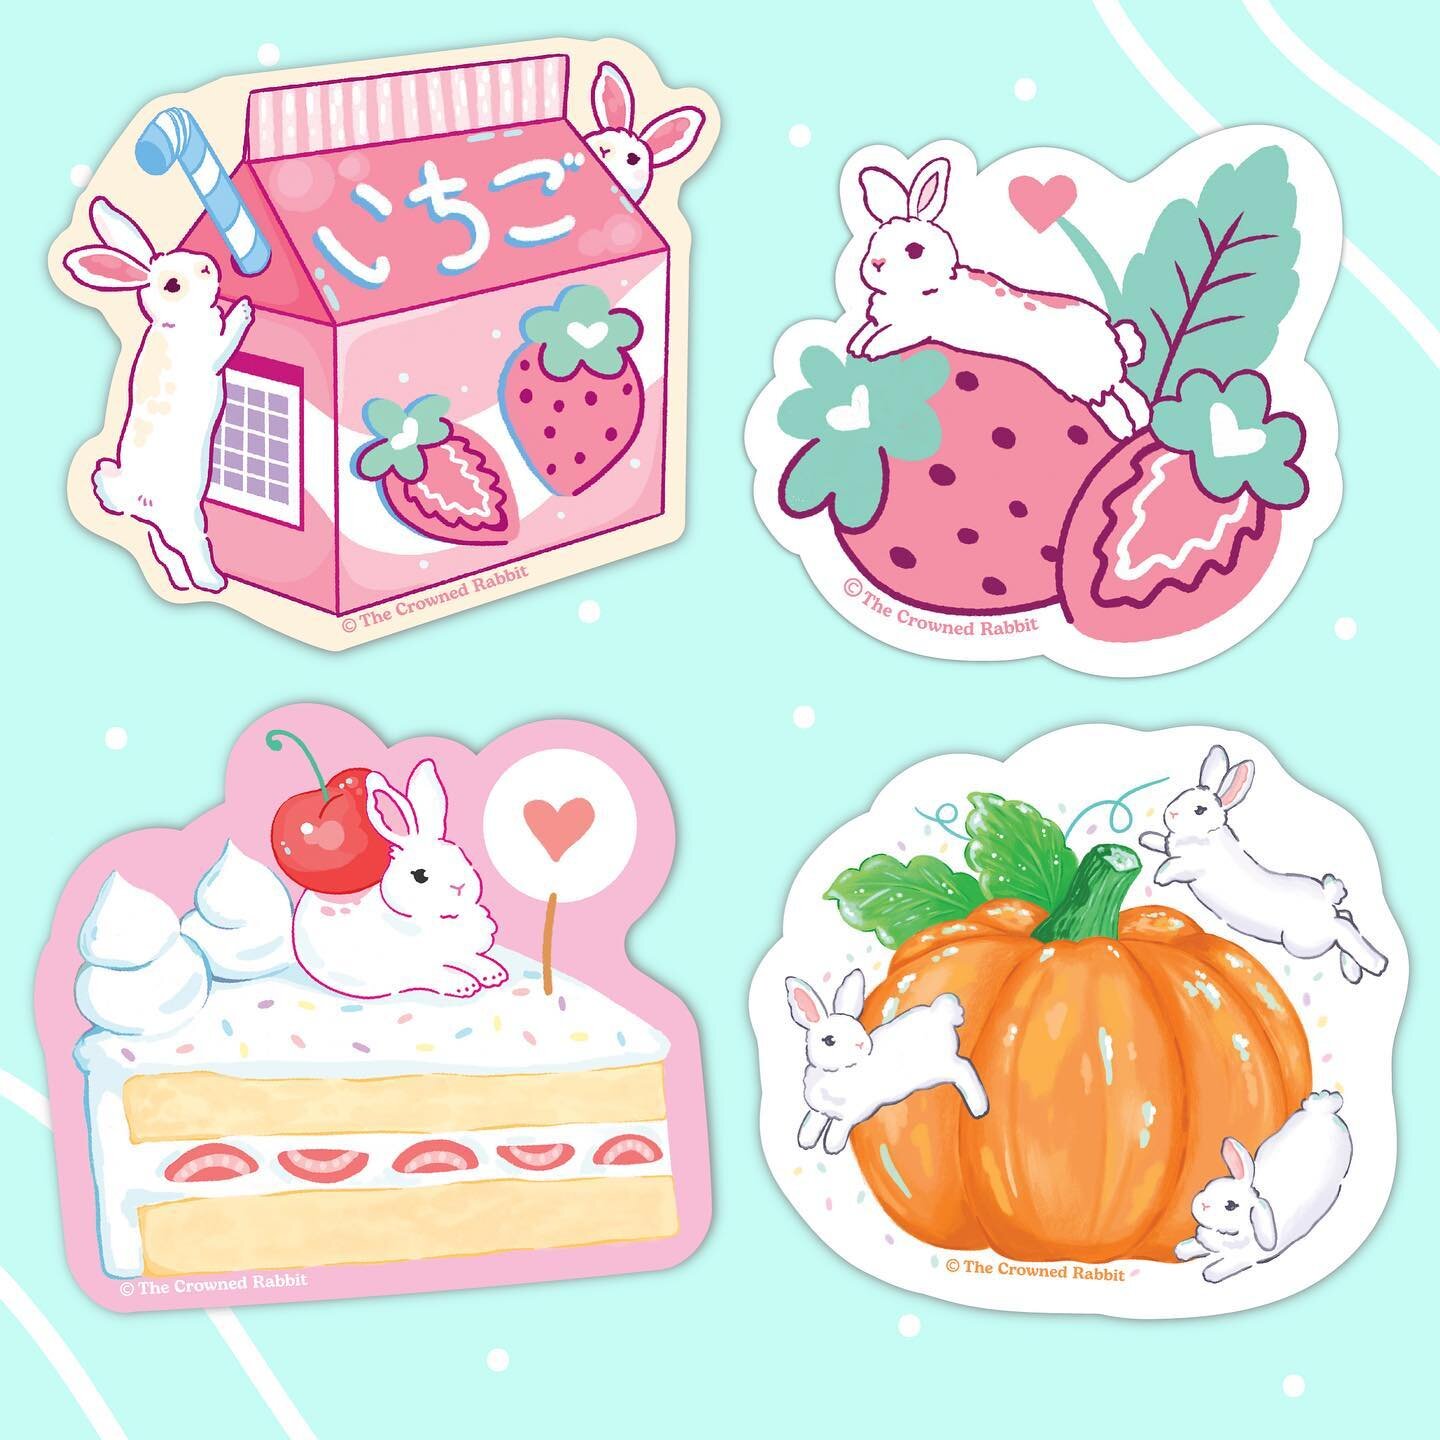 New vinyl sticker designs have been added to the Kickstarter campaign! All reward tier backers will get the Strawberry Rabbit sticker for free 🍓💕 Extras will be added to my shop after all pledges go out 🍰 #bunnyrabbit #rabbitsofinstagram 🐰 #rabbi